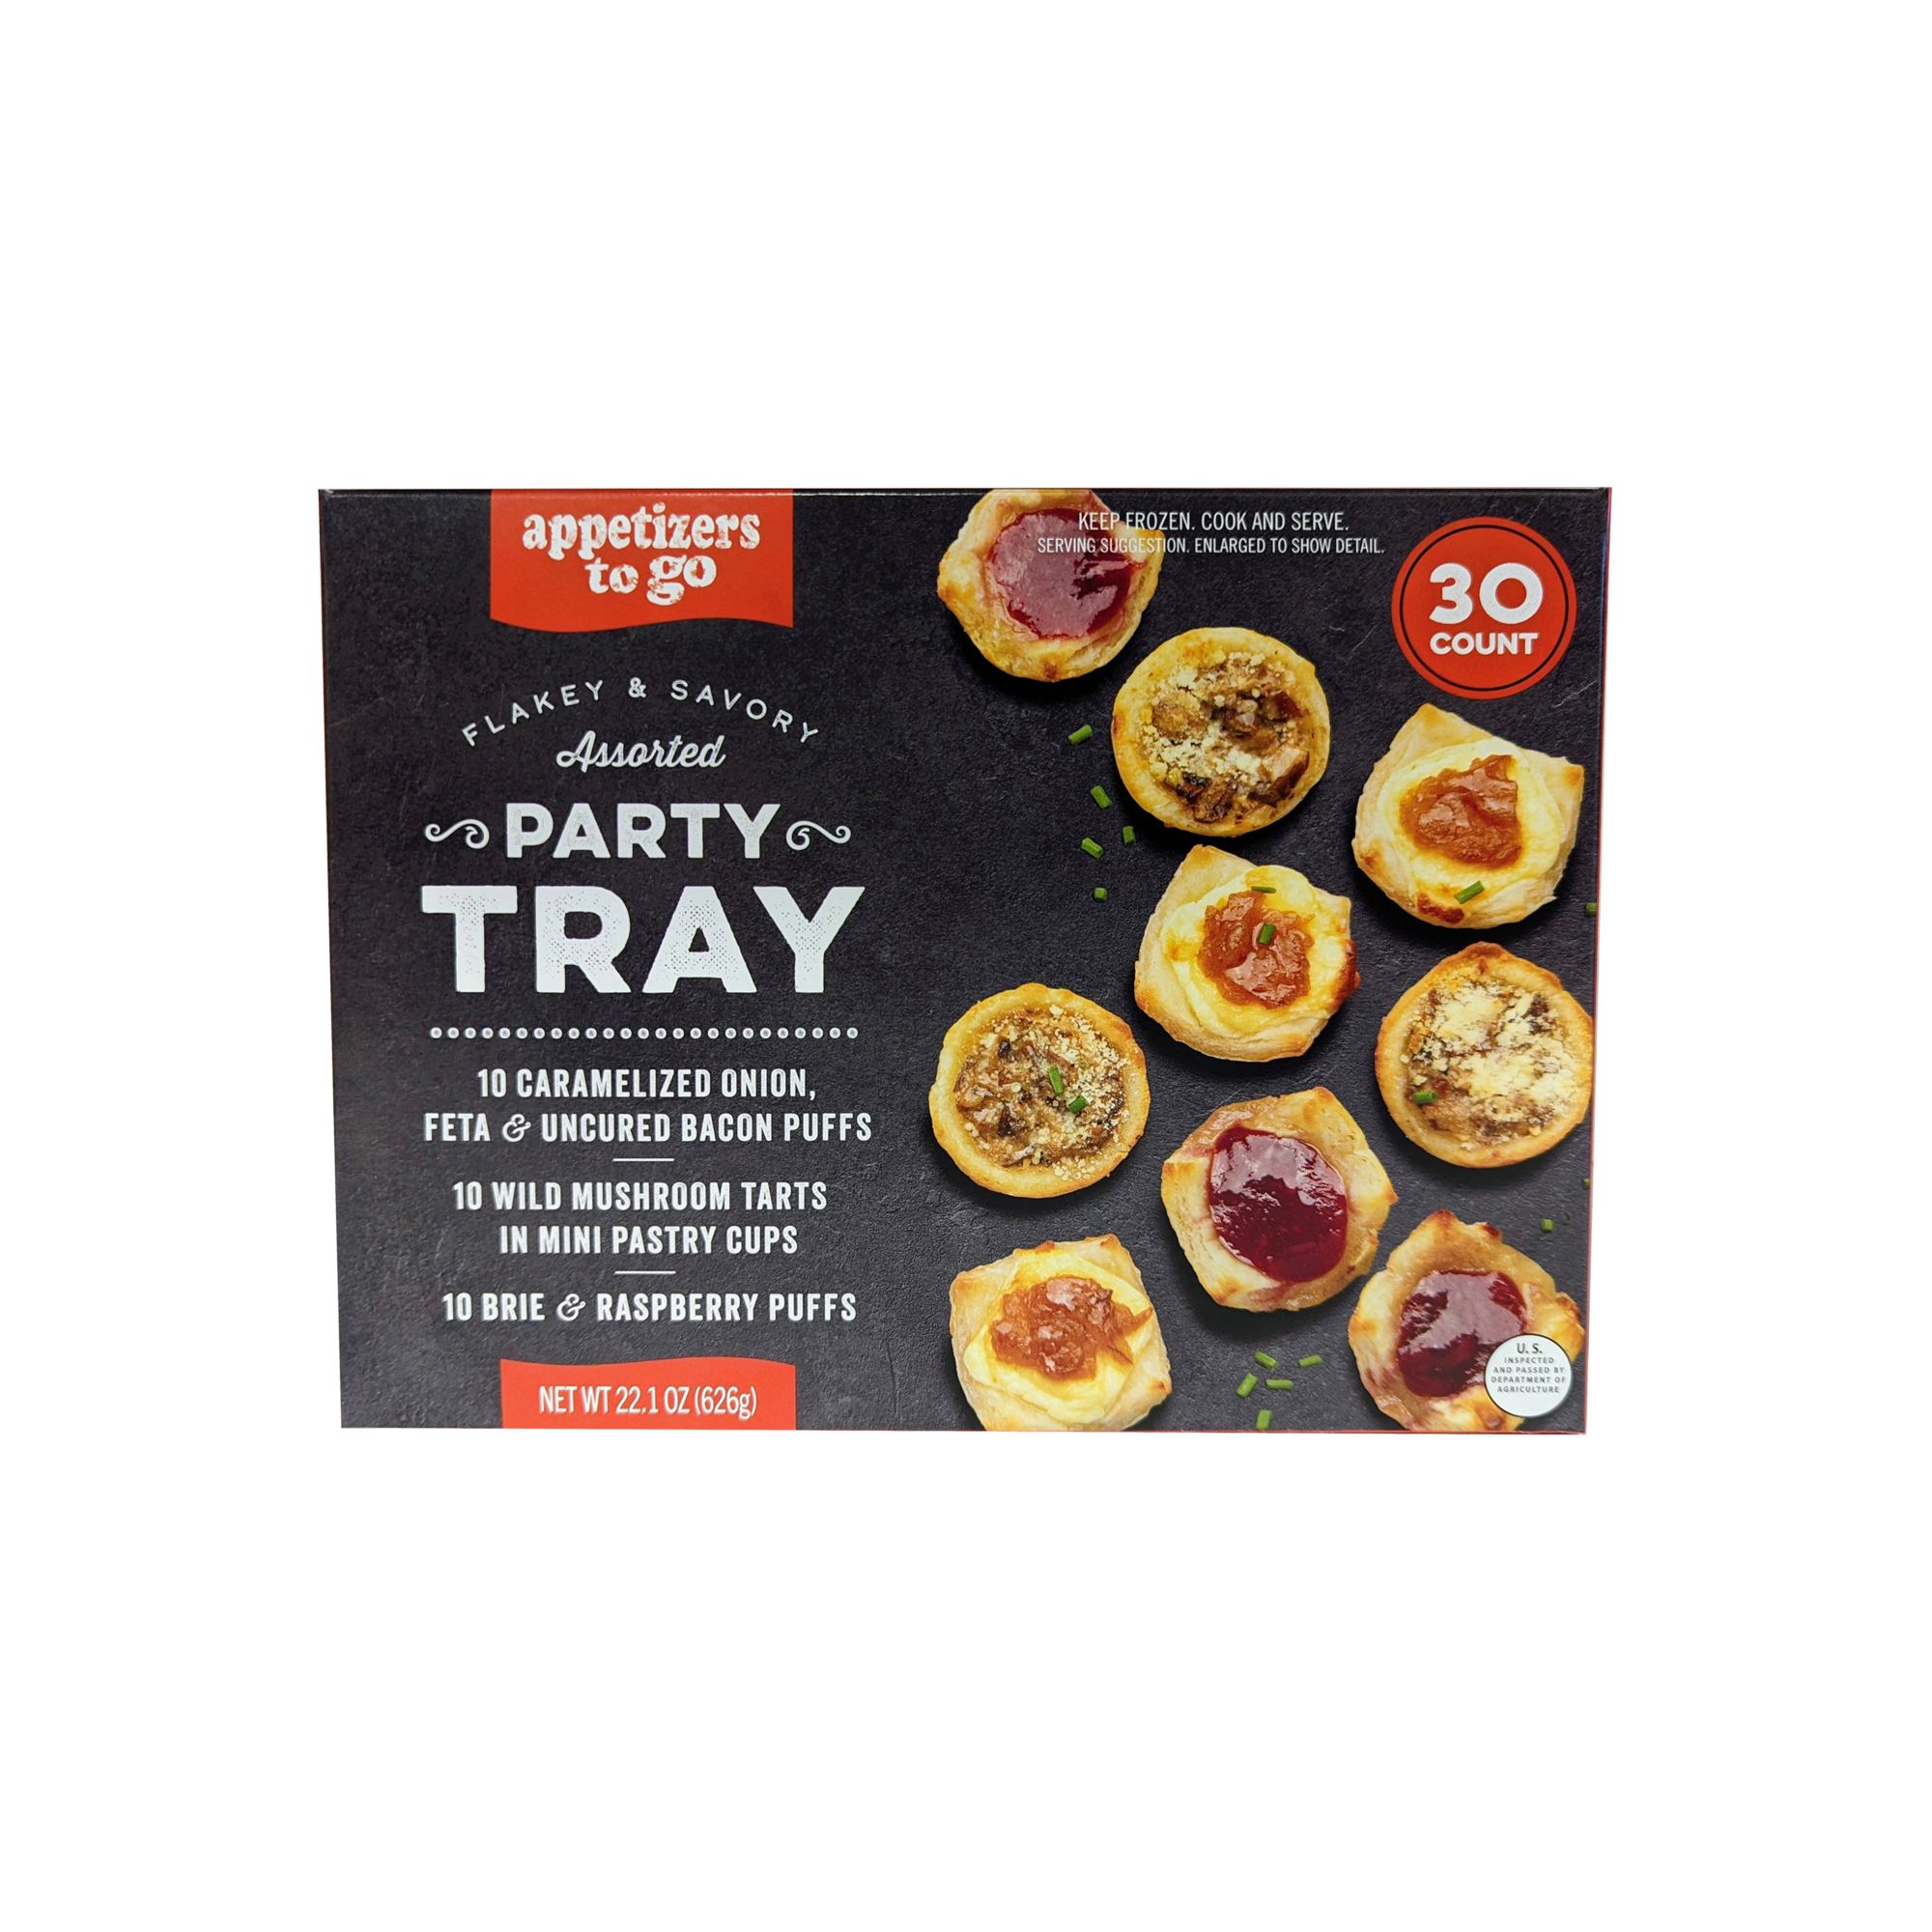 REAL COOKING MINI TARTS - The Toy Insider